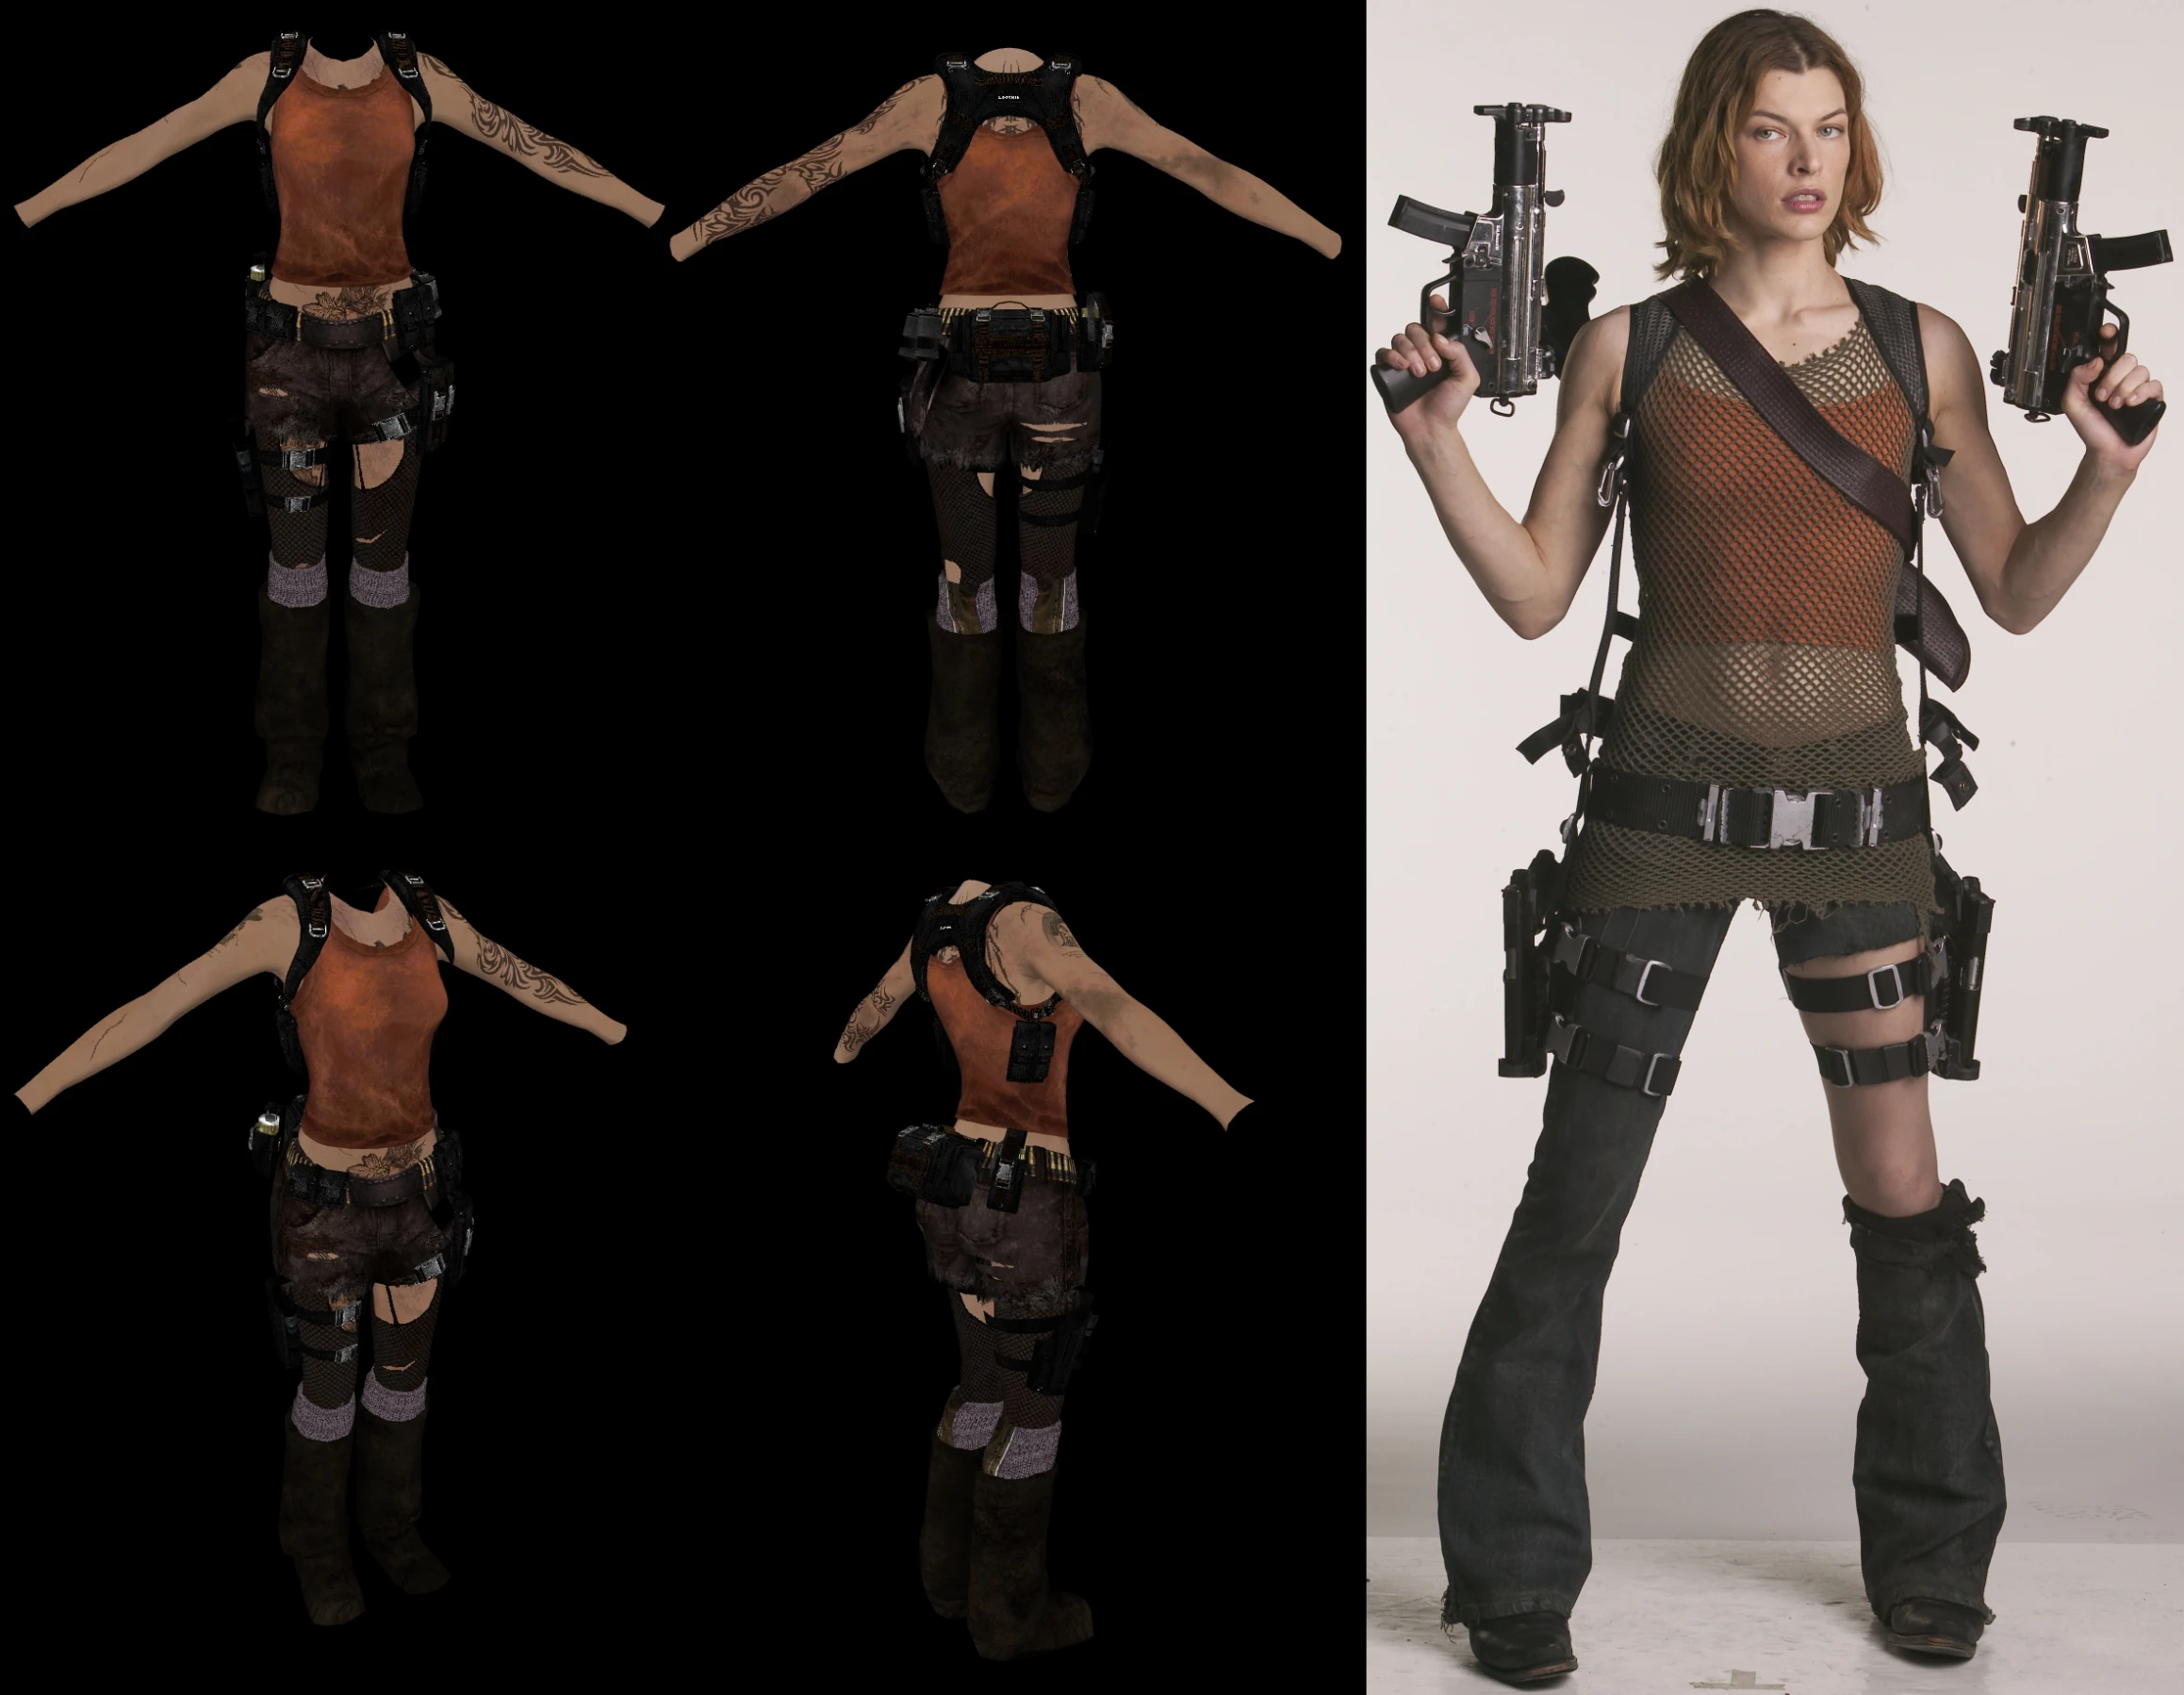 Alice resident evil outfit